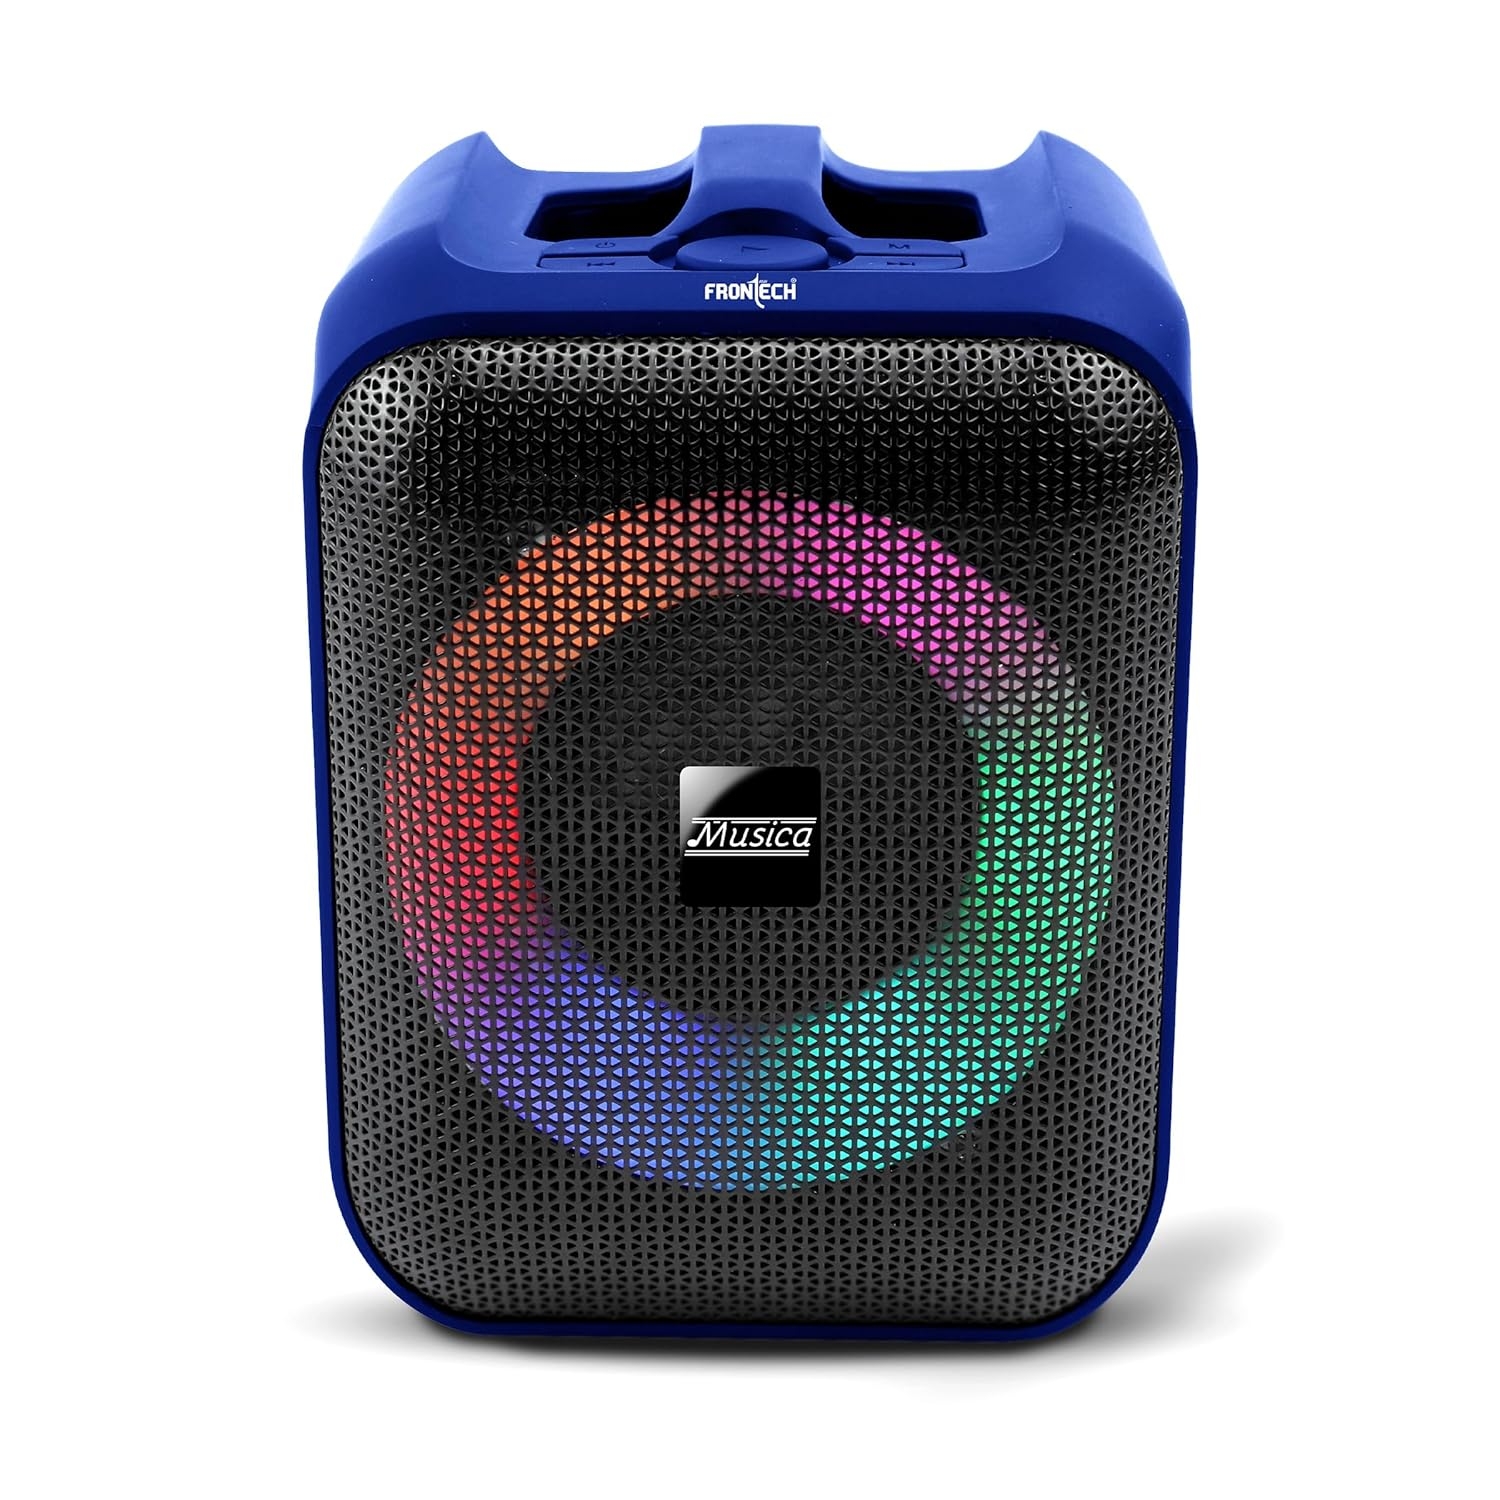 FRONTECH Multimedia Bluetooth 5.3 Speaker | 1200mAh Battery | 8W Sound | Type-C Charging | TF Card (SW-0189) Bluetooth Speakers